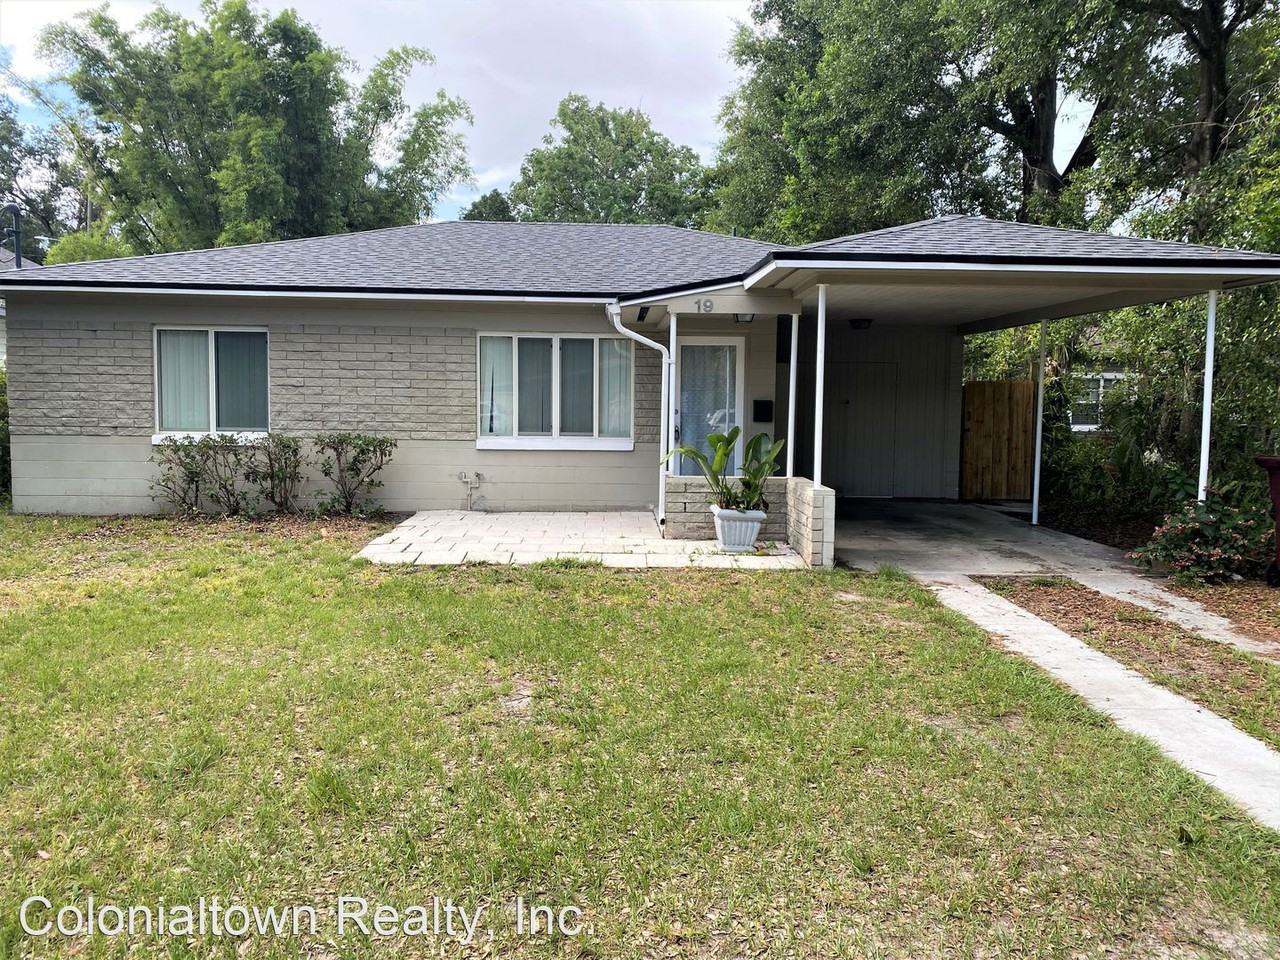 200 W King St, Orlando, FL 200 20 Bedroom House for Rent for ...